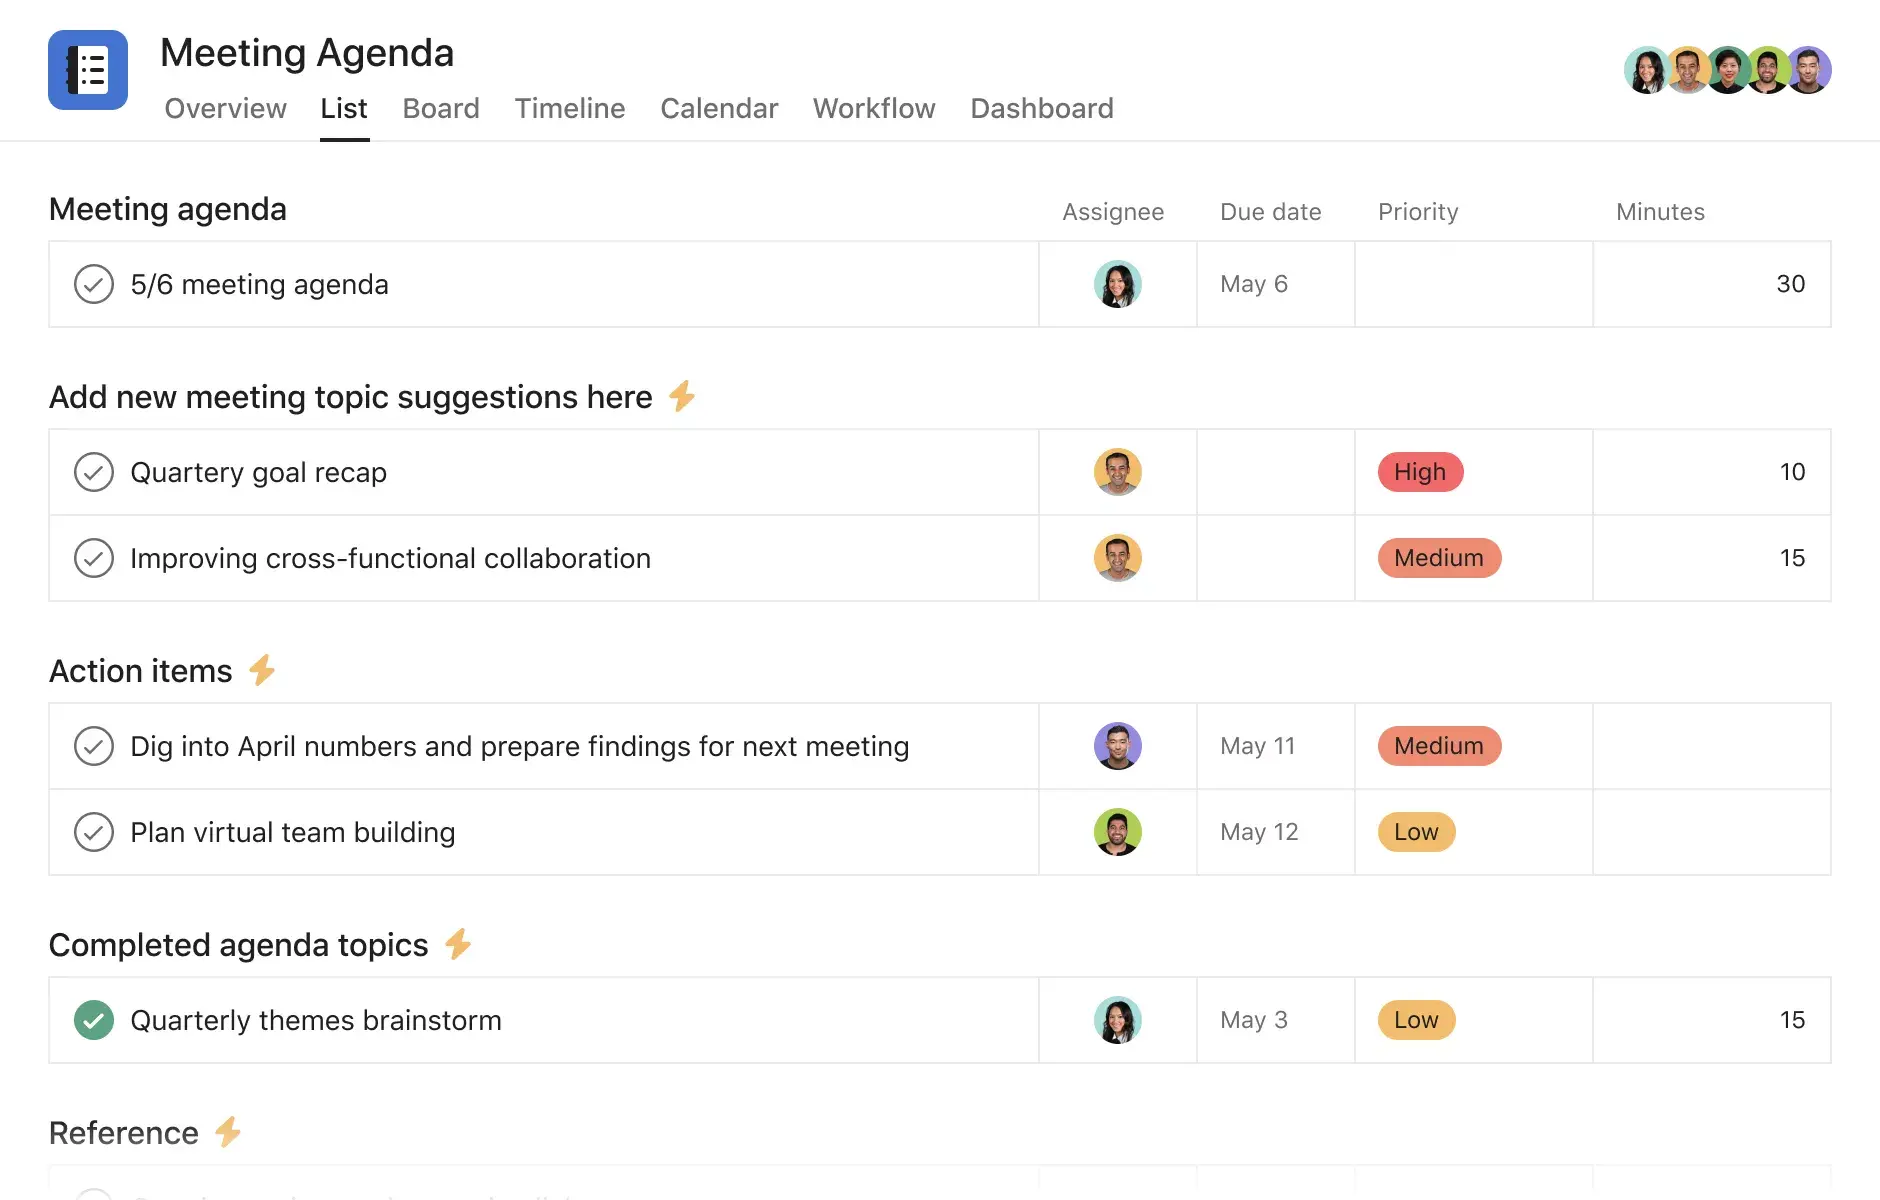 [Product UI] Meeting agenda example template in Asana, spreadsheet-style project view (lists)